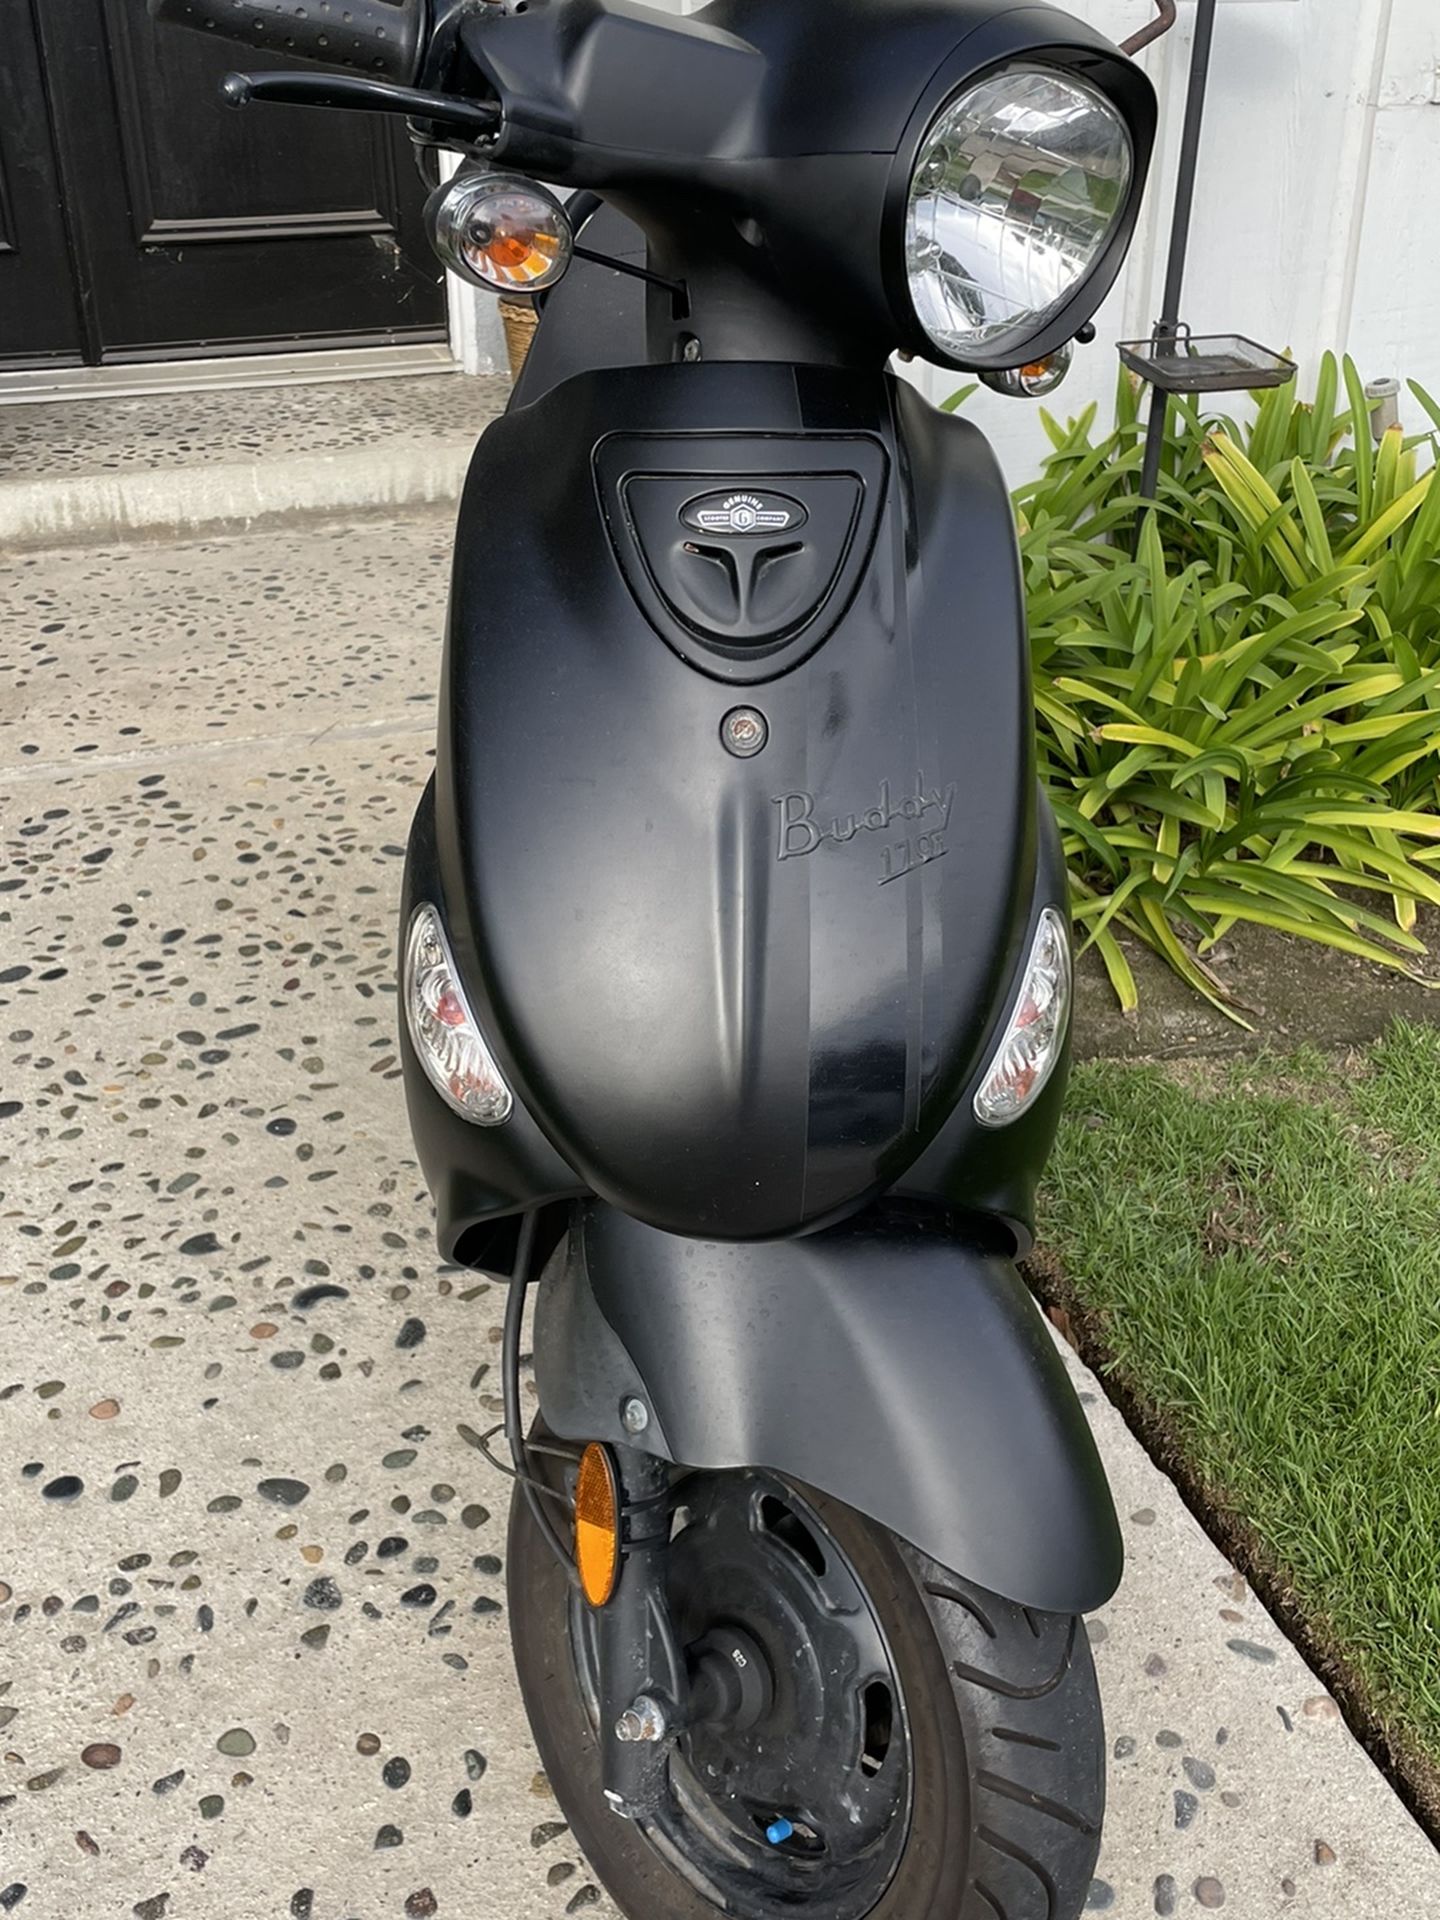 Genuine Buddy 170i Scooter (Moped)